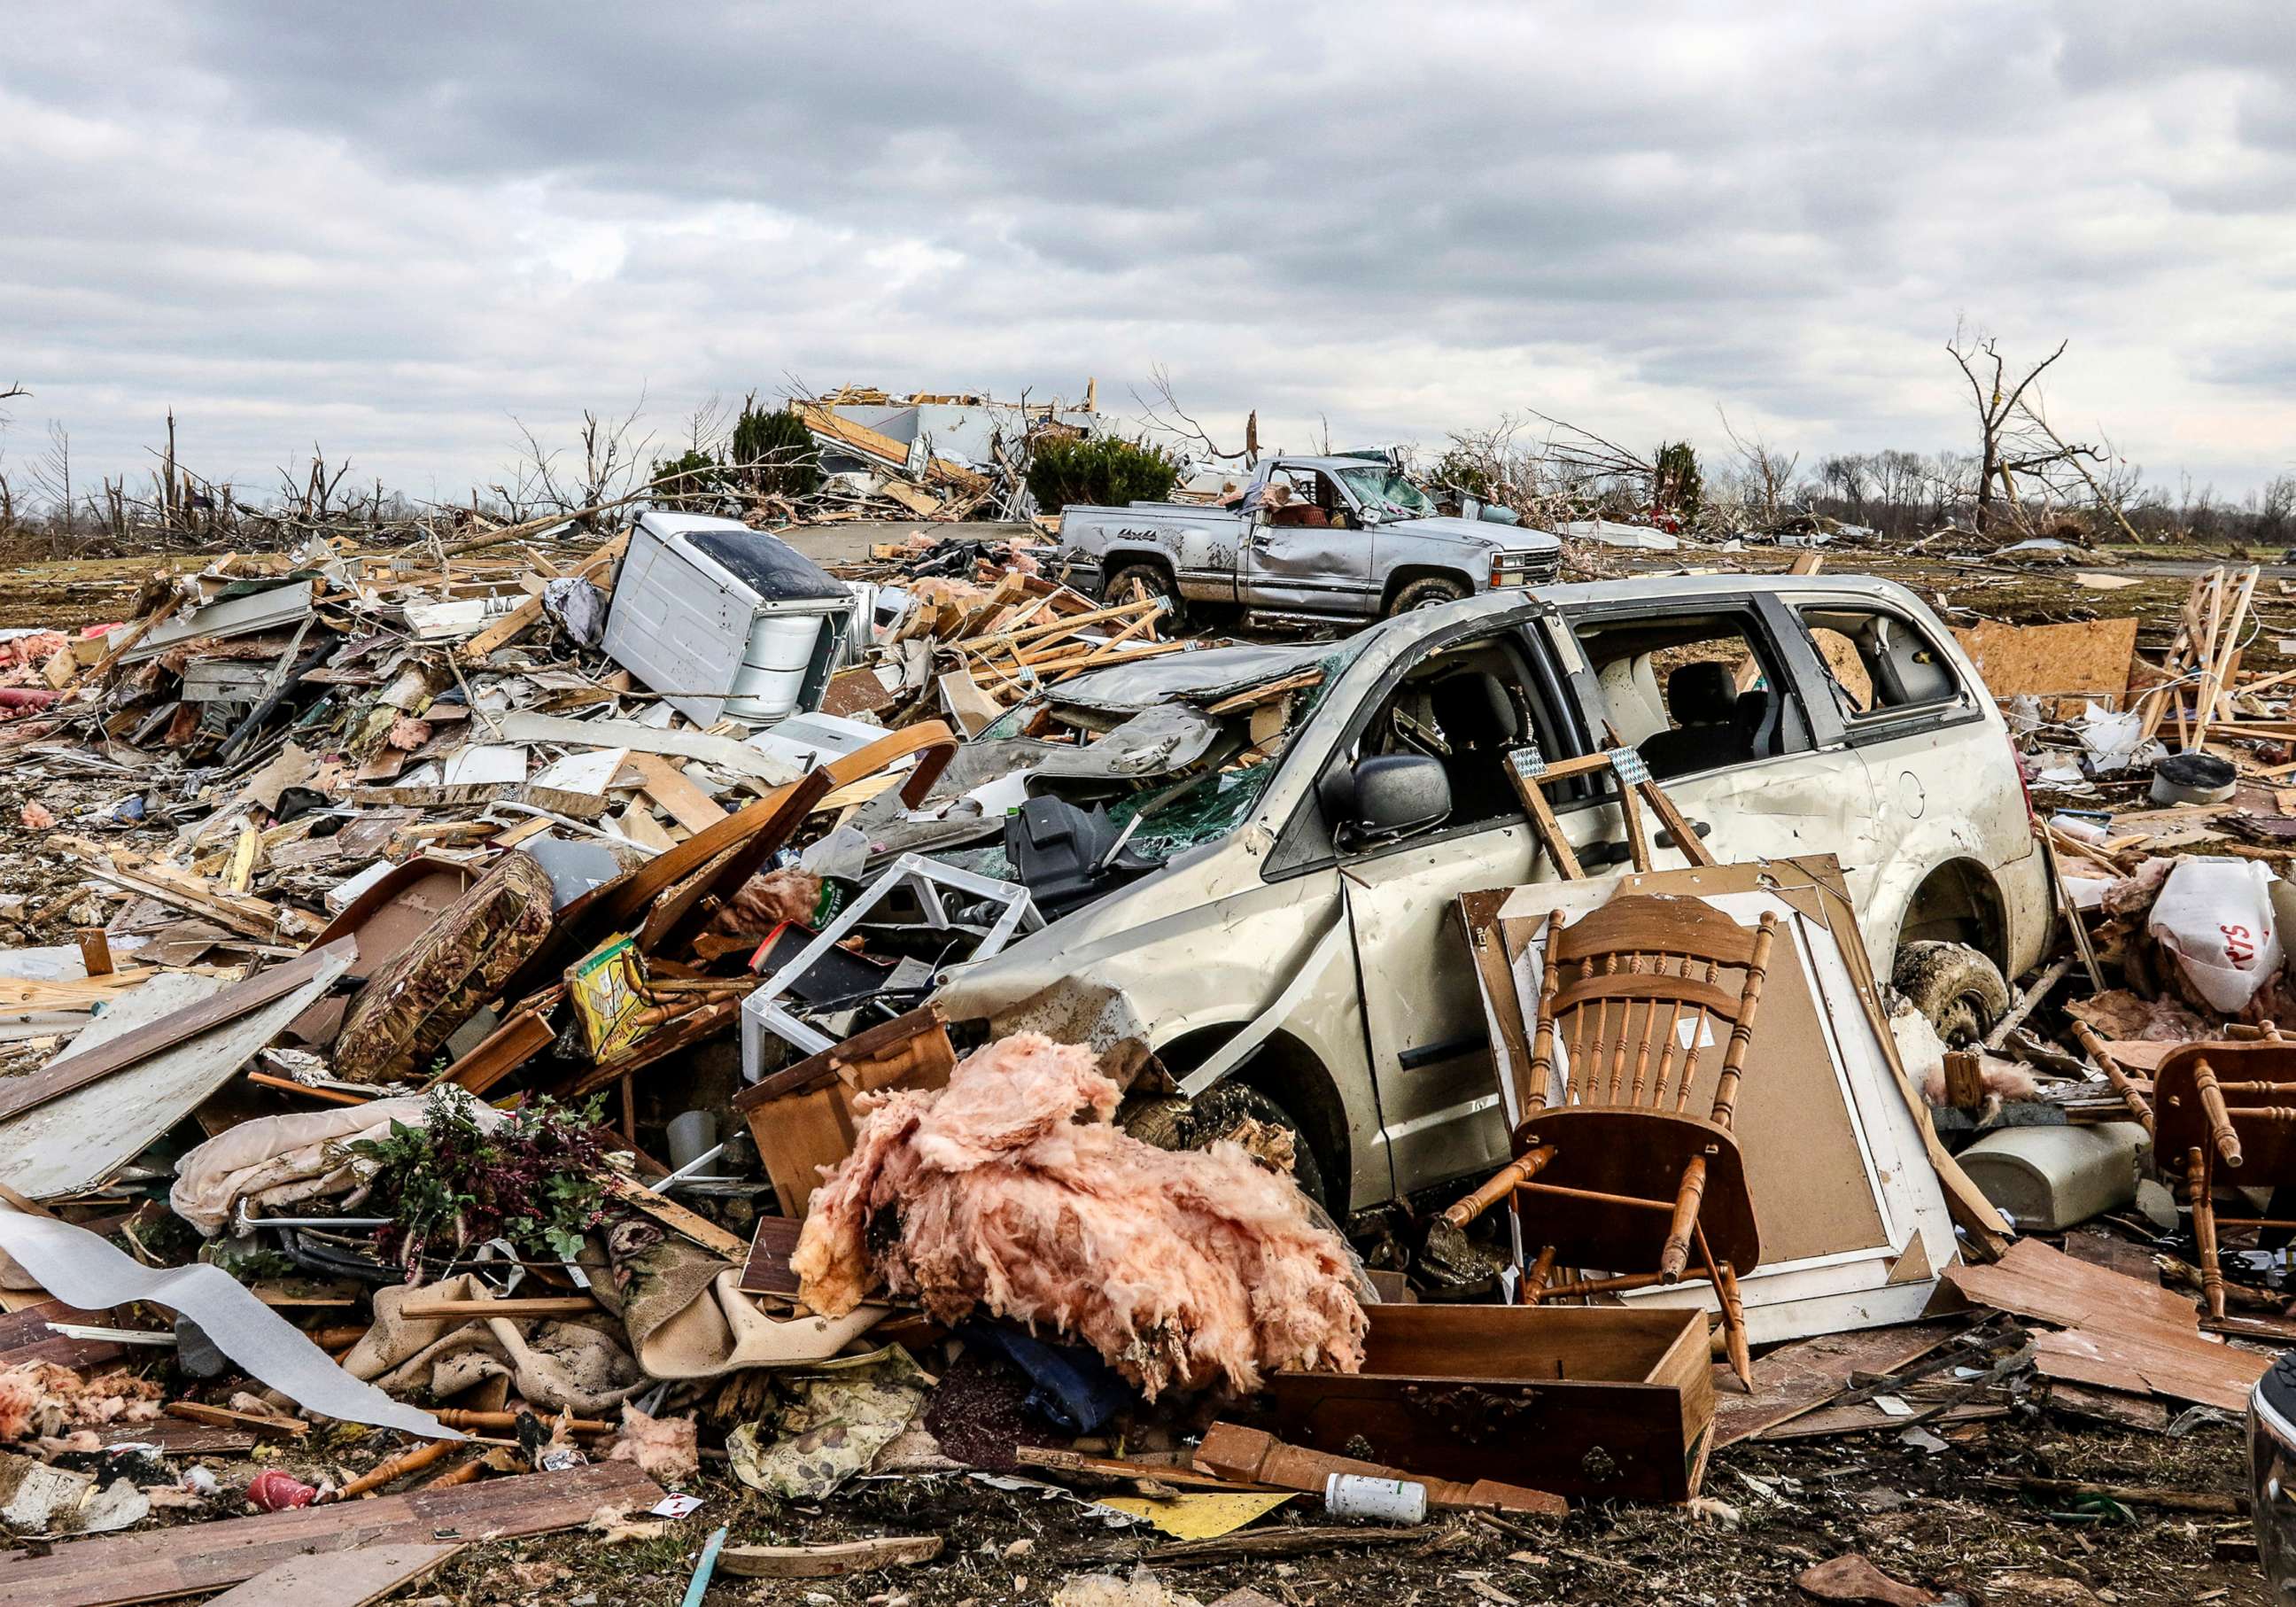 PHOTO: Damaged vehicles and personal property are strewn over a wide area,  Dec. 11, 2021, in Bremen, Ky, after a devastating tornado swept through the area overnight.